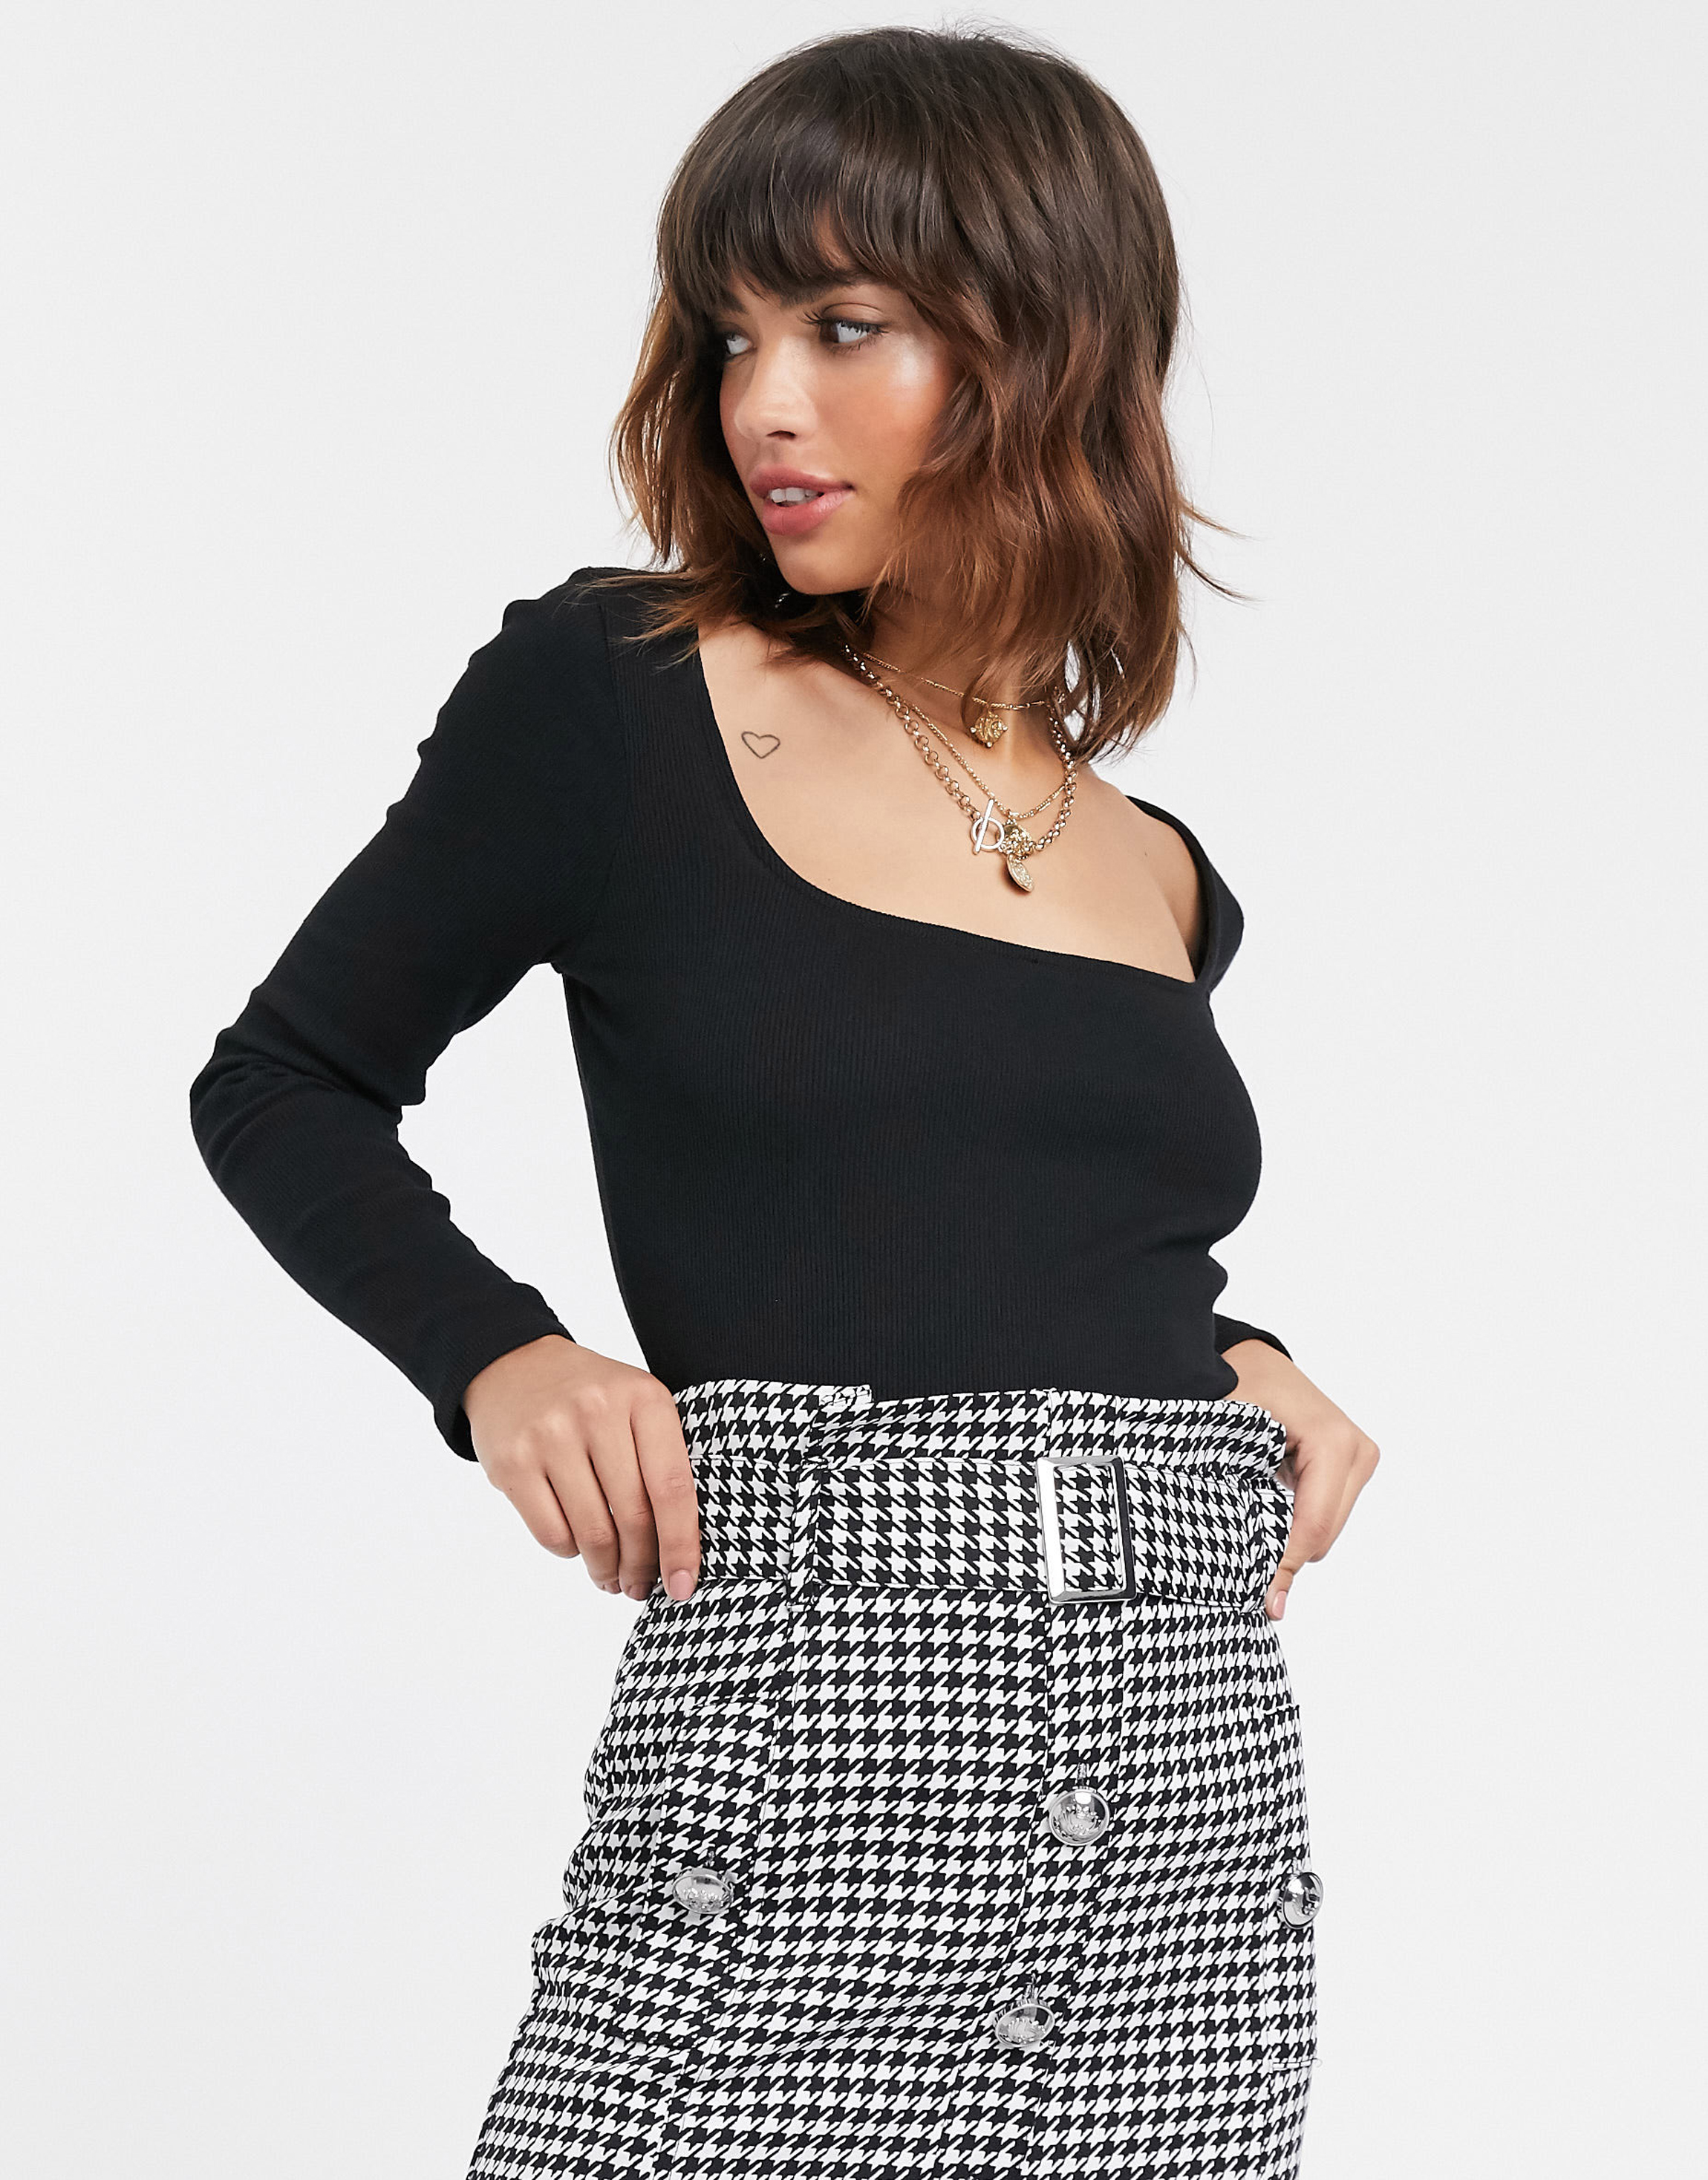 River Island Long Sleeved Square Neck Top in Black, £12; skirt out of stock, ASOS